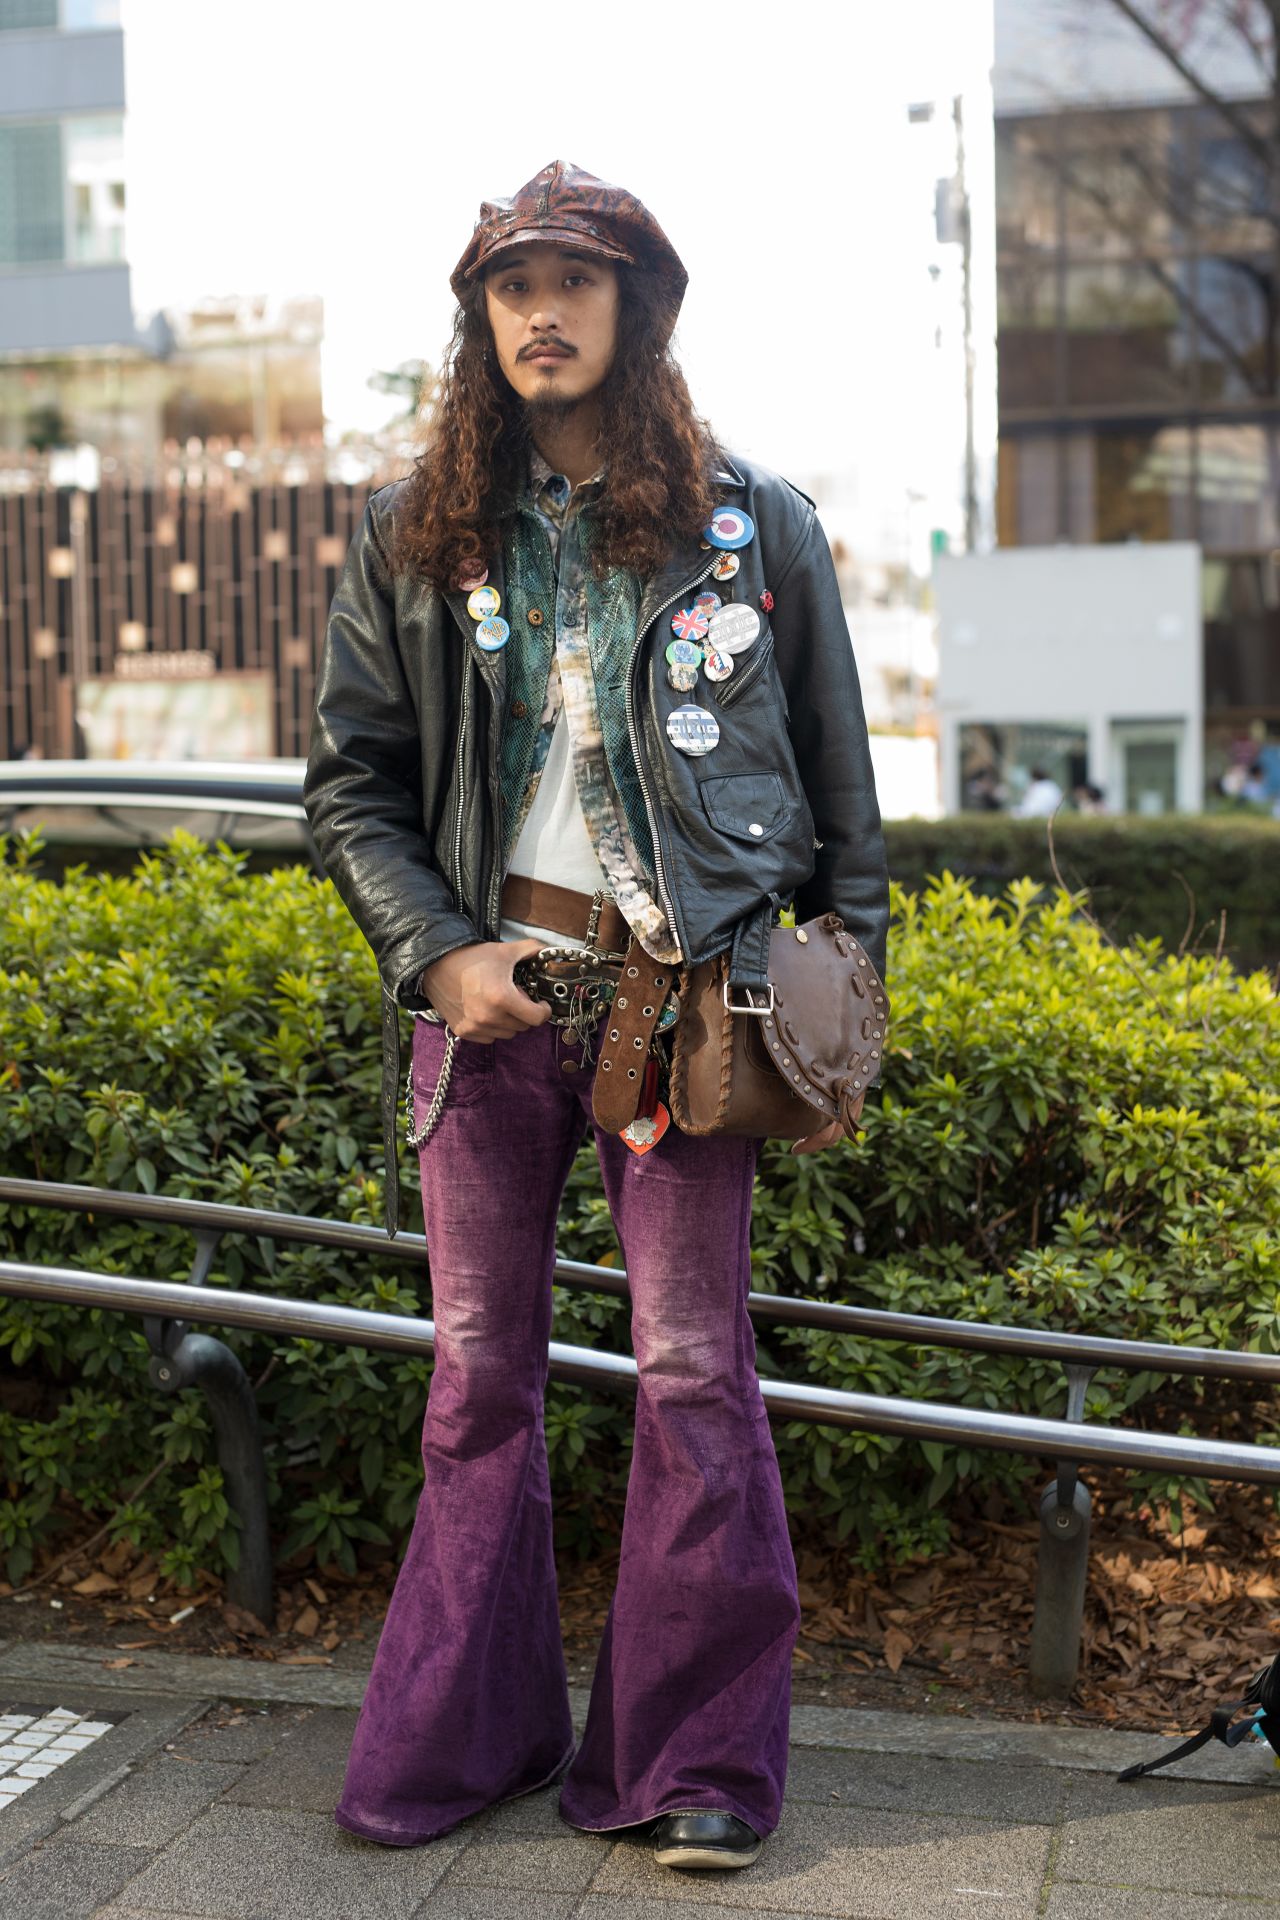 Stood outside the HEoS show, a guest pairs purple flare pants with a black leather jacket while accessorizing with a brown newsboy hat and studded bag.